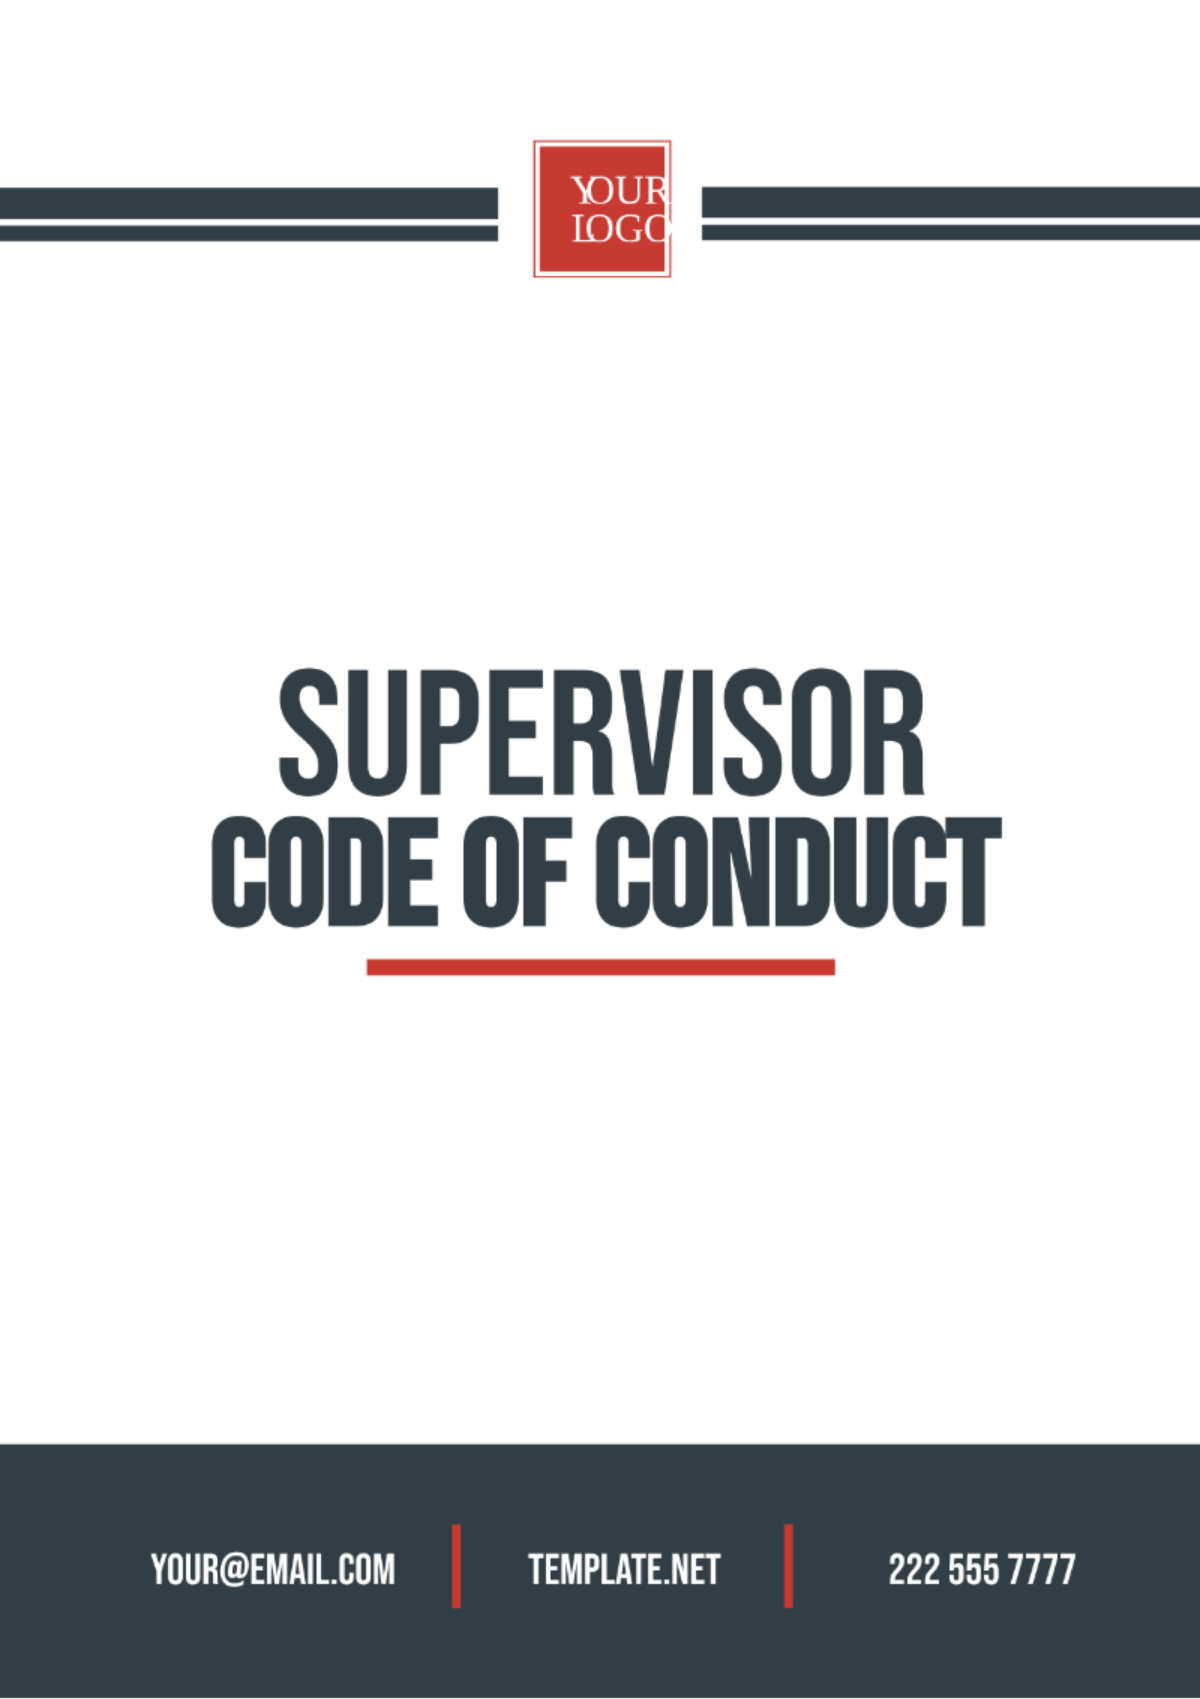 Supervisor Code of Conduct Template